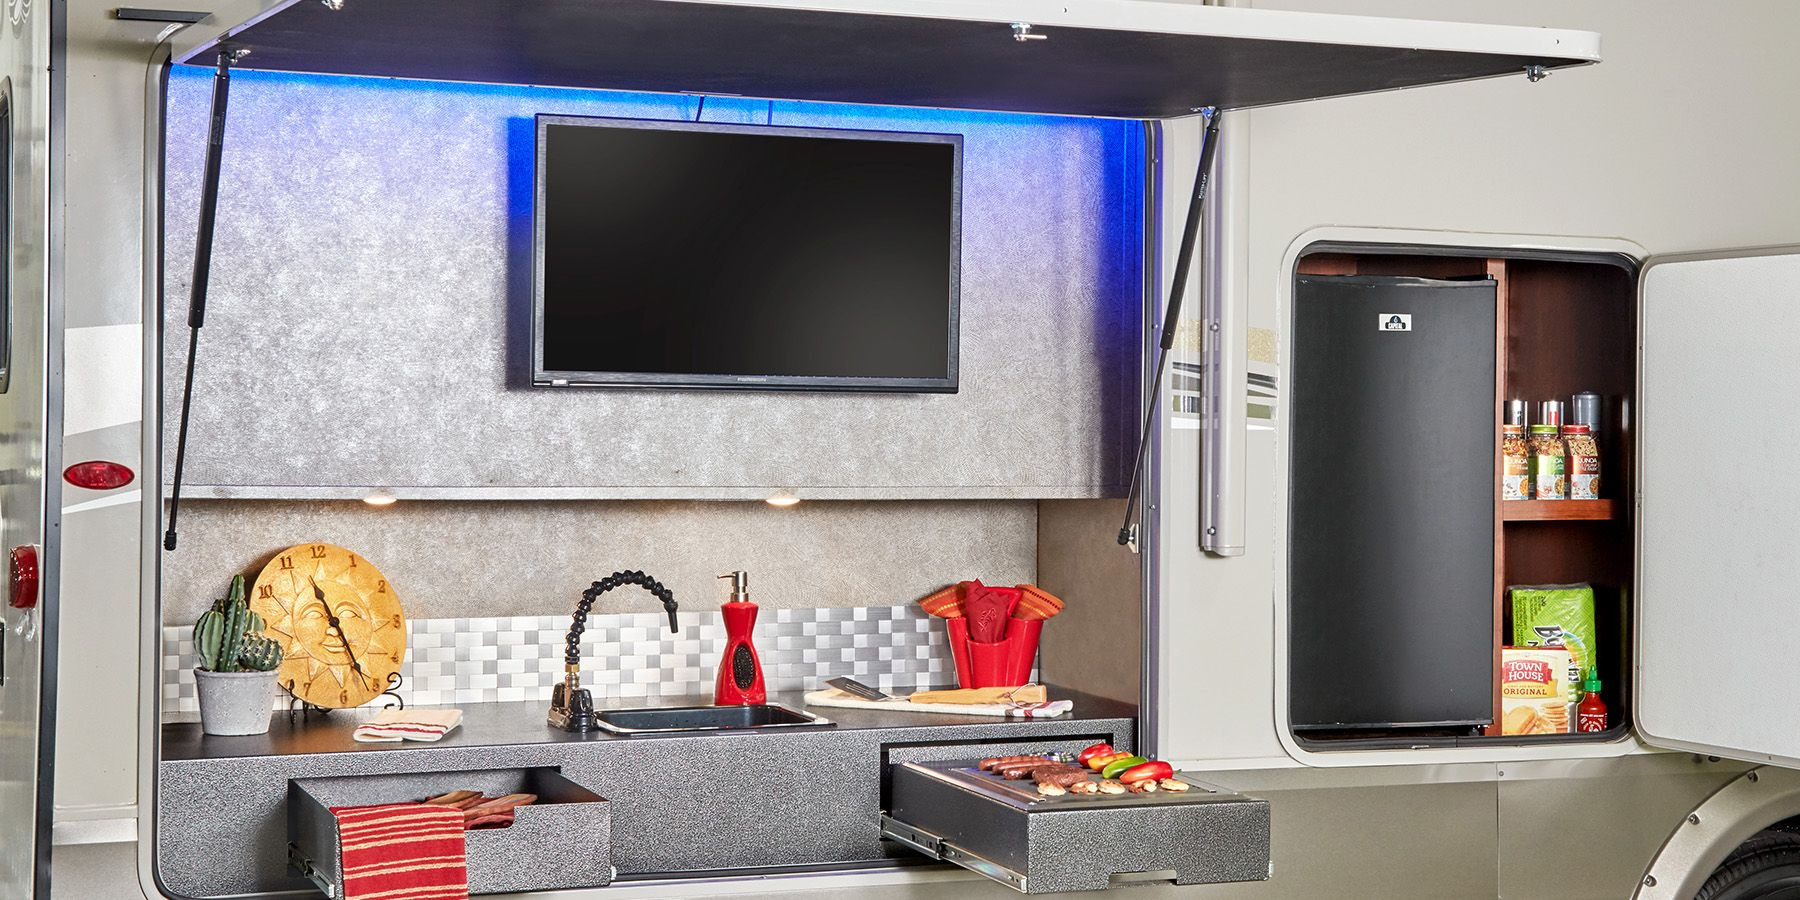 Fifth Wheel With Outdoor Kitchen
 2018 Eagle HT Fifth Wheel